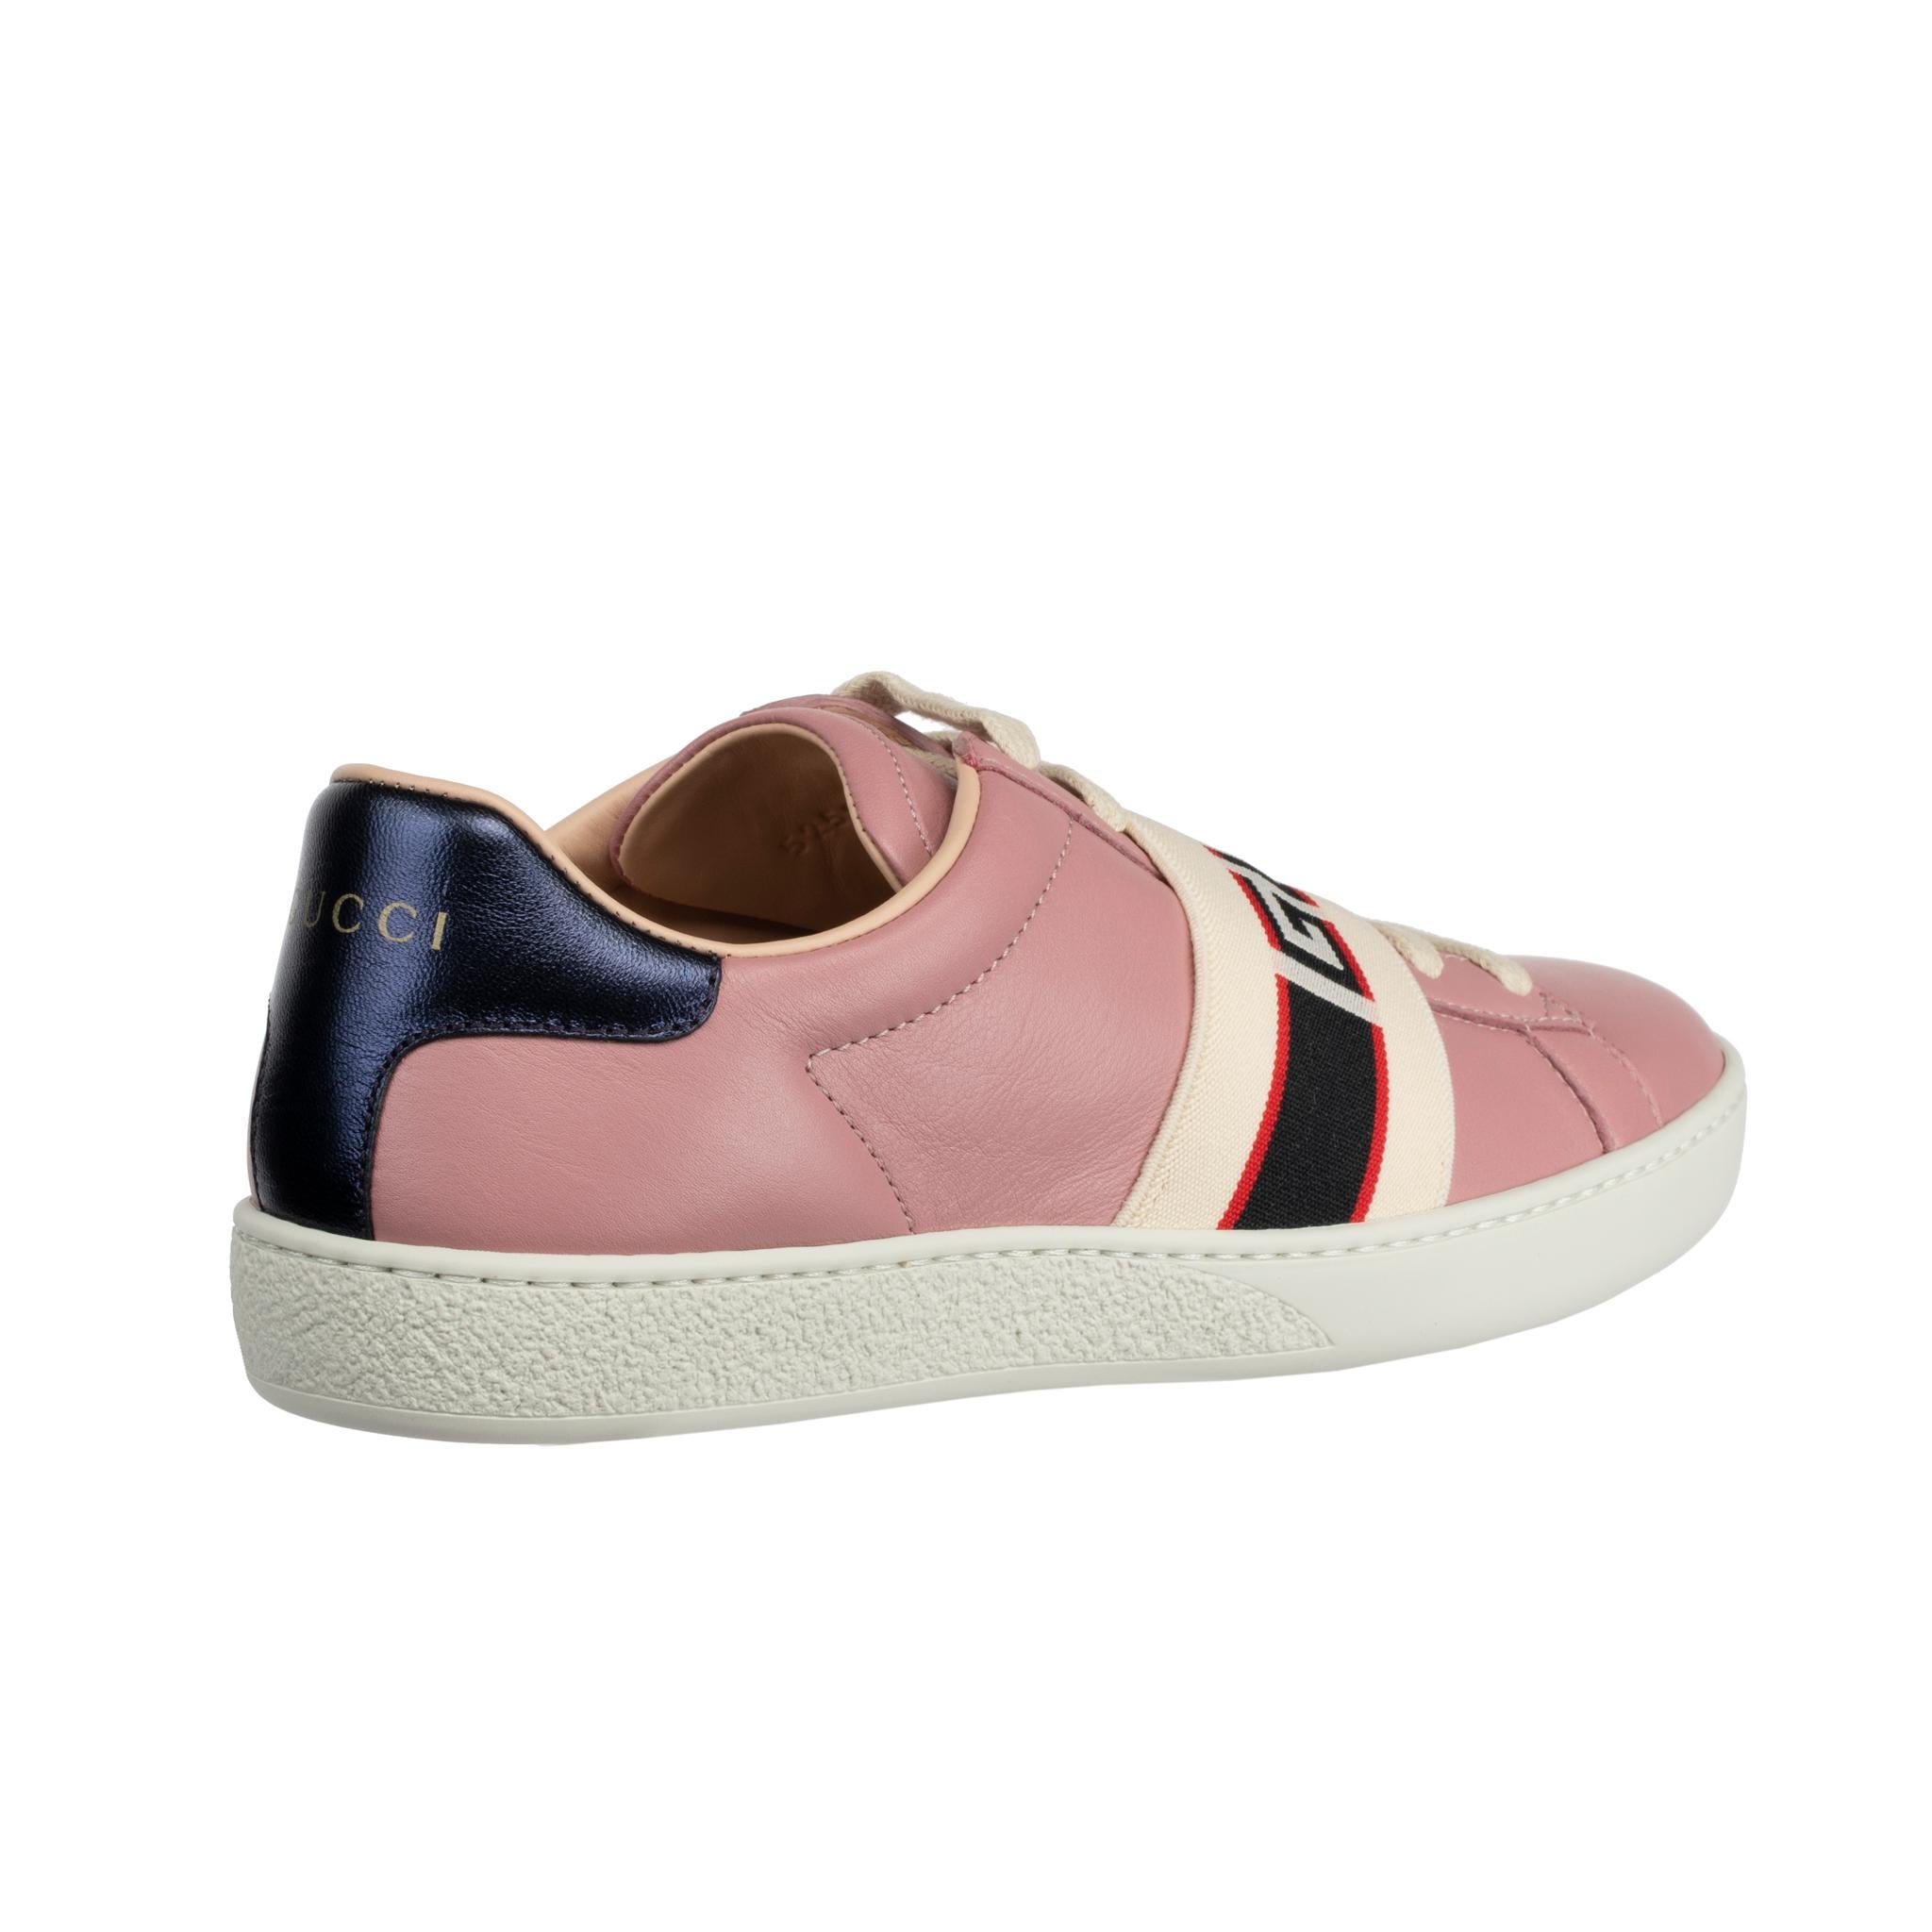 Gucci Ace Sneaker Dusty Pink & Metallic Blue 35 IT In New Condition For Sale In DOUBLE BAY, NSW